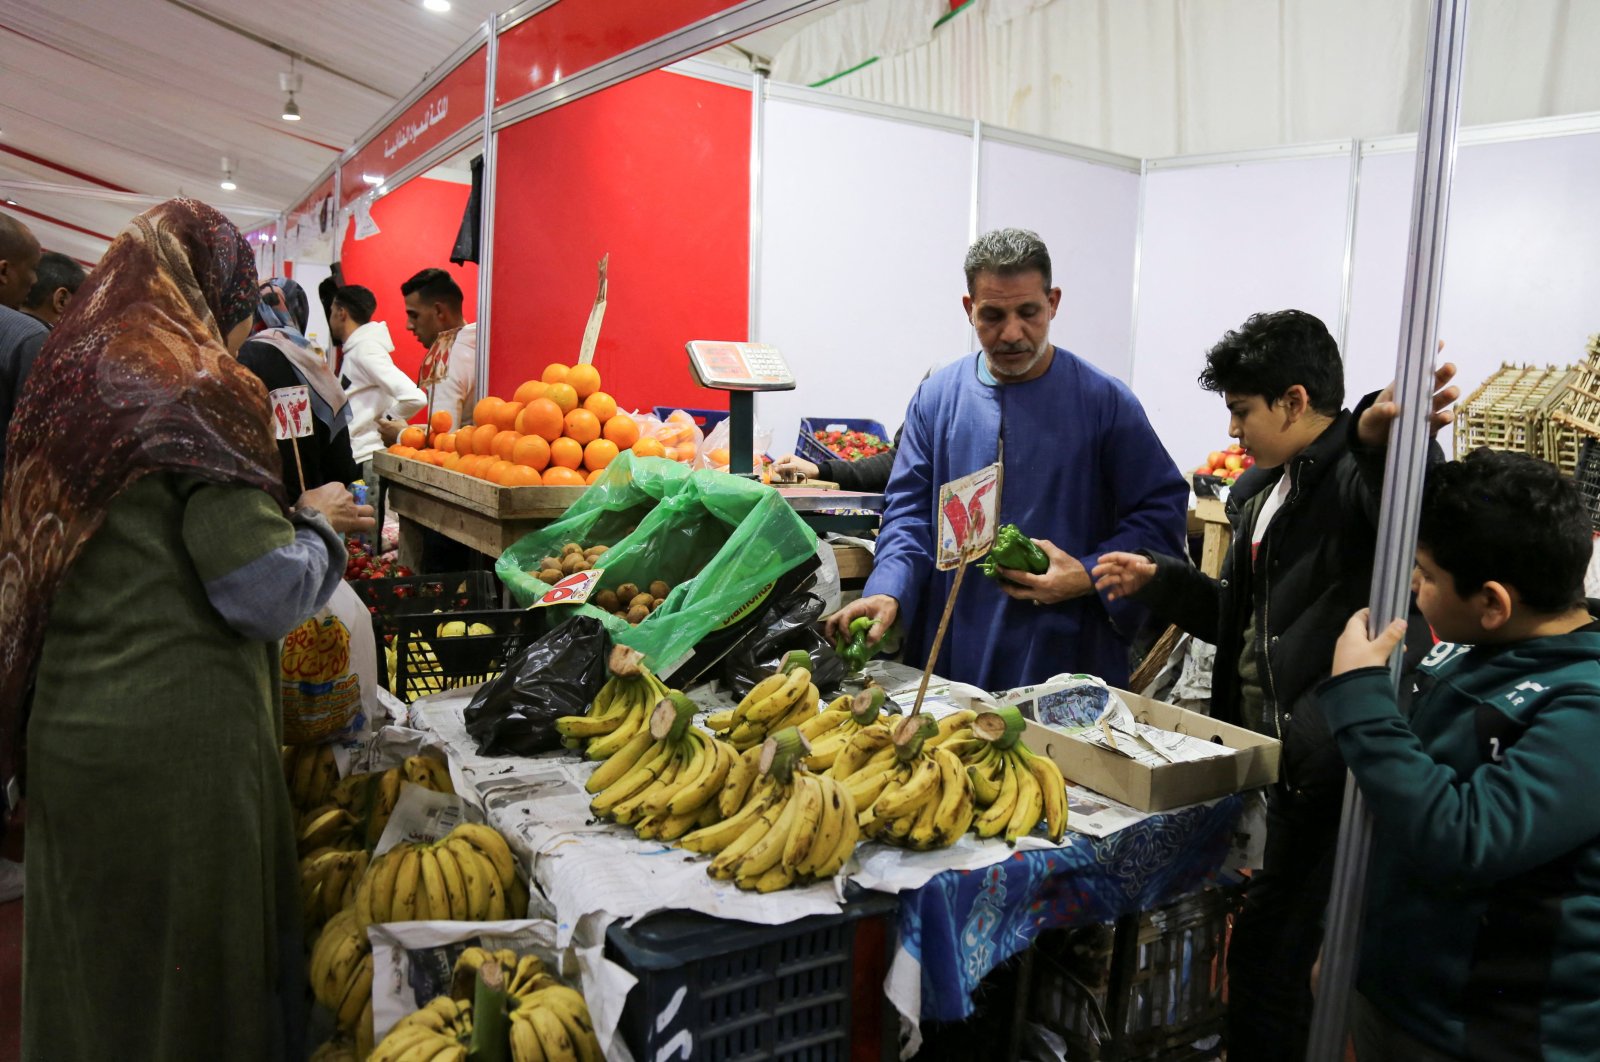 People buy fruits from a market selling food at discounted prices, after a devaluation of the Egyptian pound led to a sharp increase in prices, in Giza, Egypt, Jan. 28, 2023. (Reuters Photo)